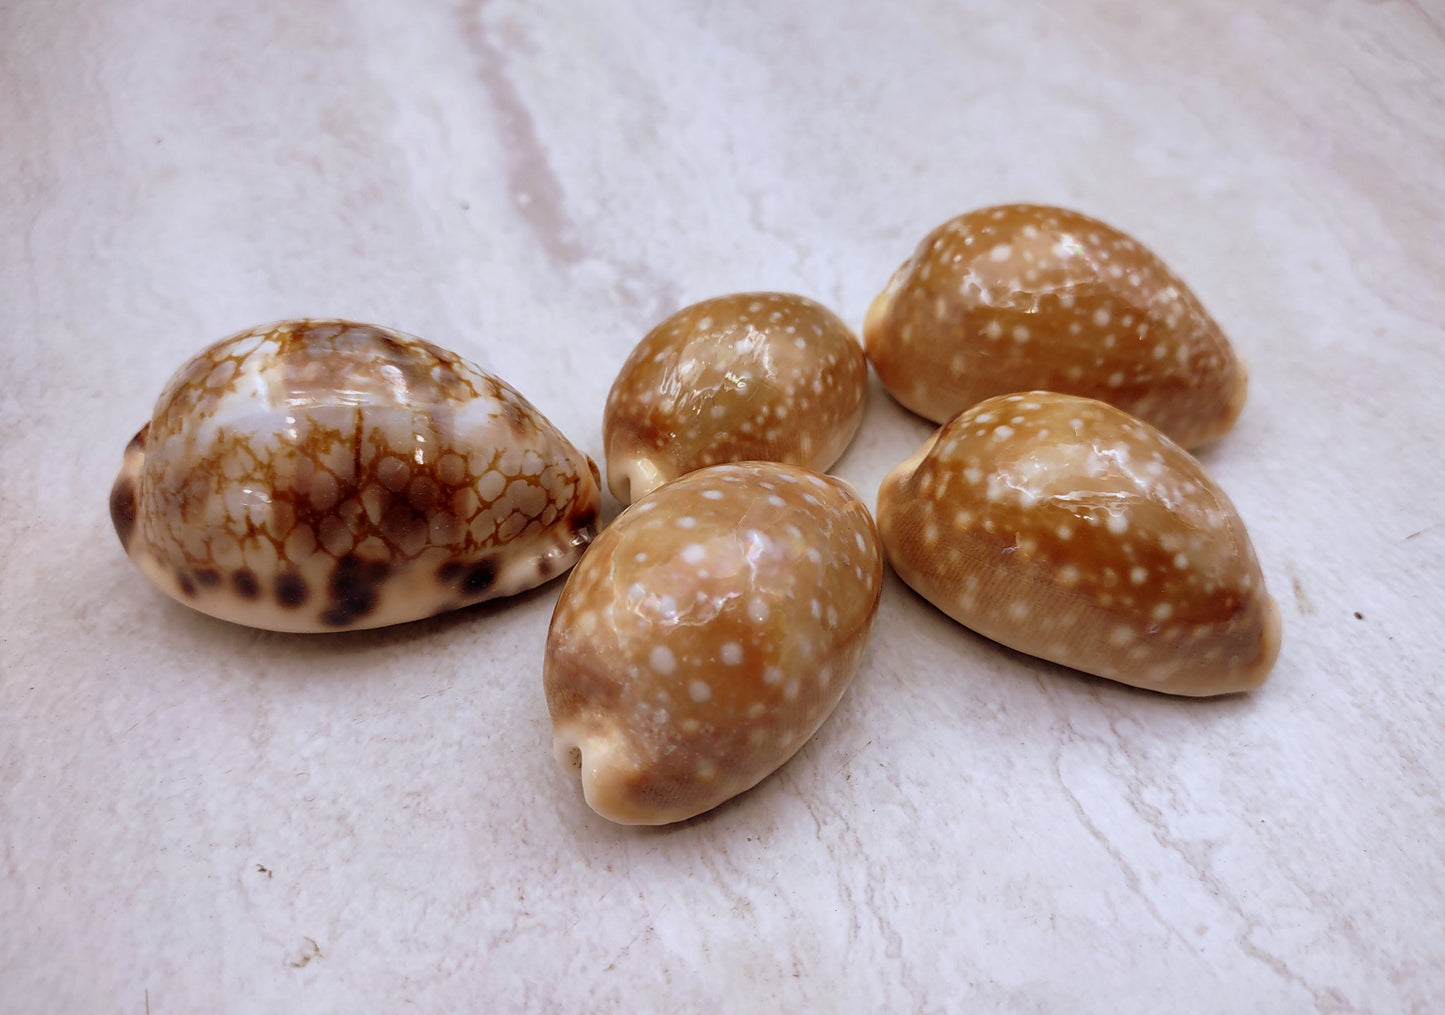 Calf Cowrie Shells - Cypraea Vitellus - (4 shells approx. 2 inches). multiple tan and white spotted shells with teal stripe in pile. Copyright 2022 SeaShellSupply.com.